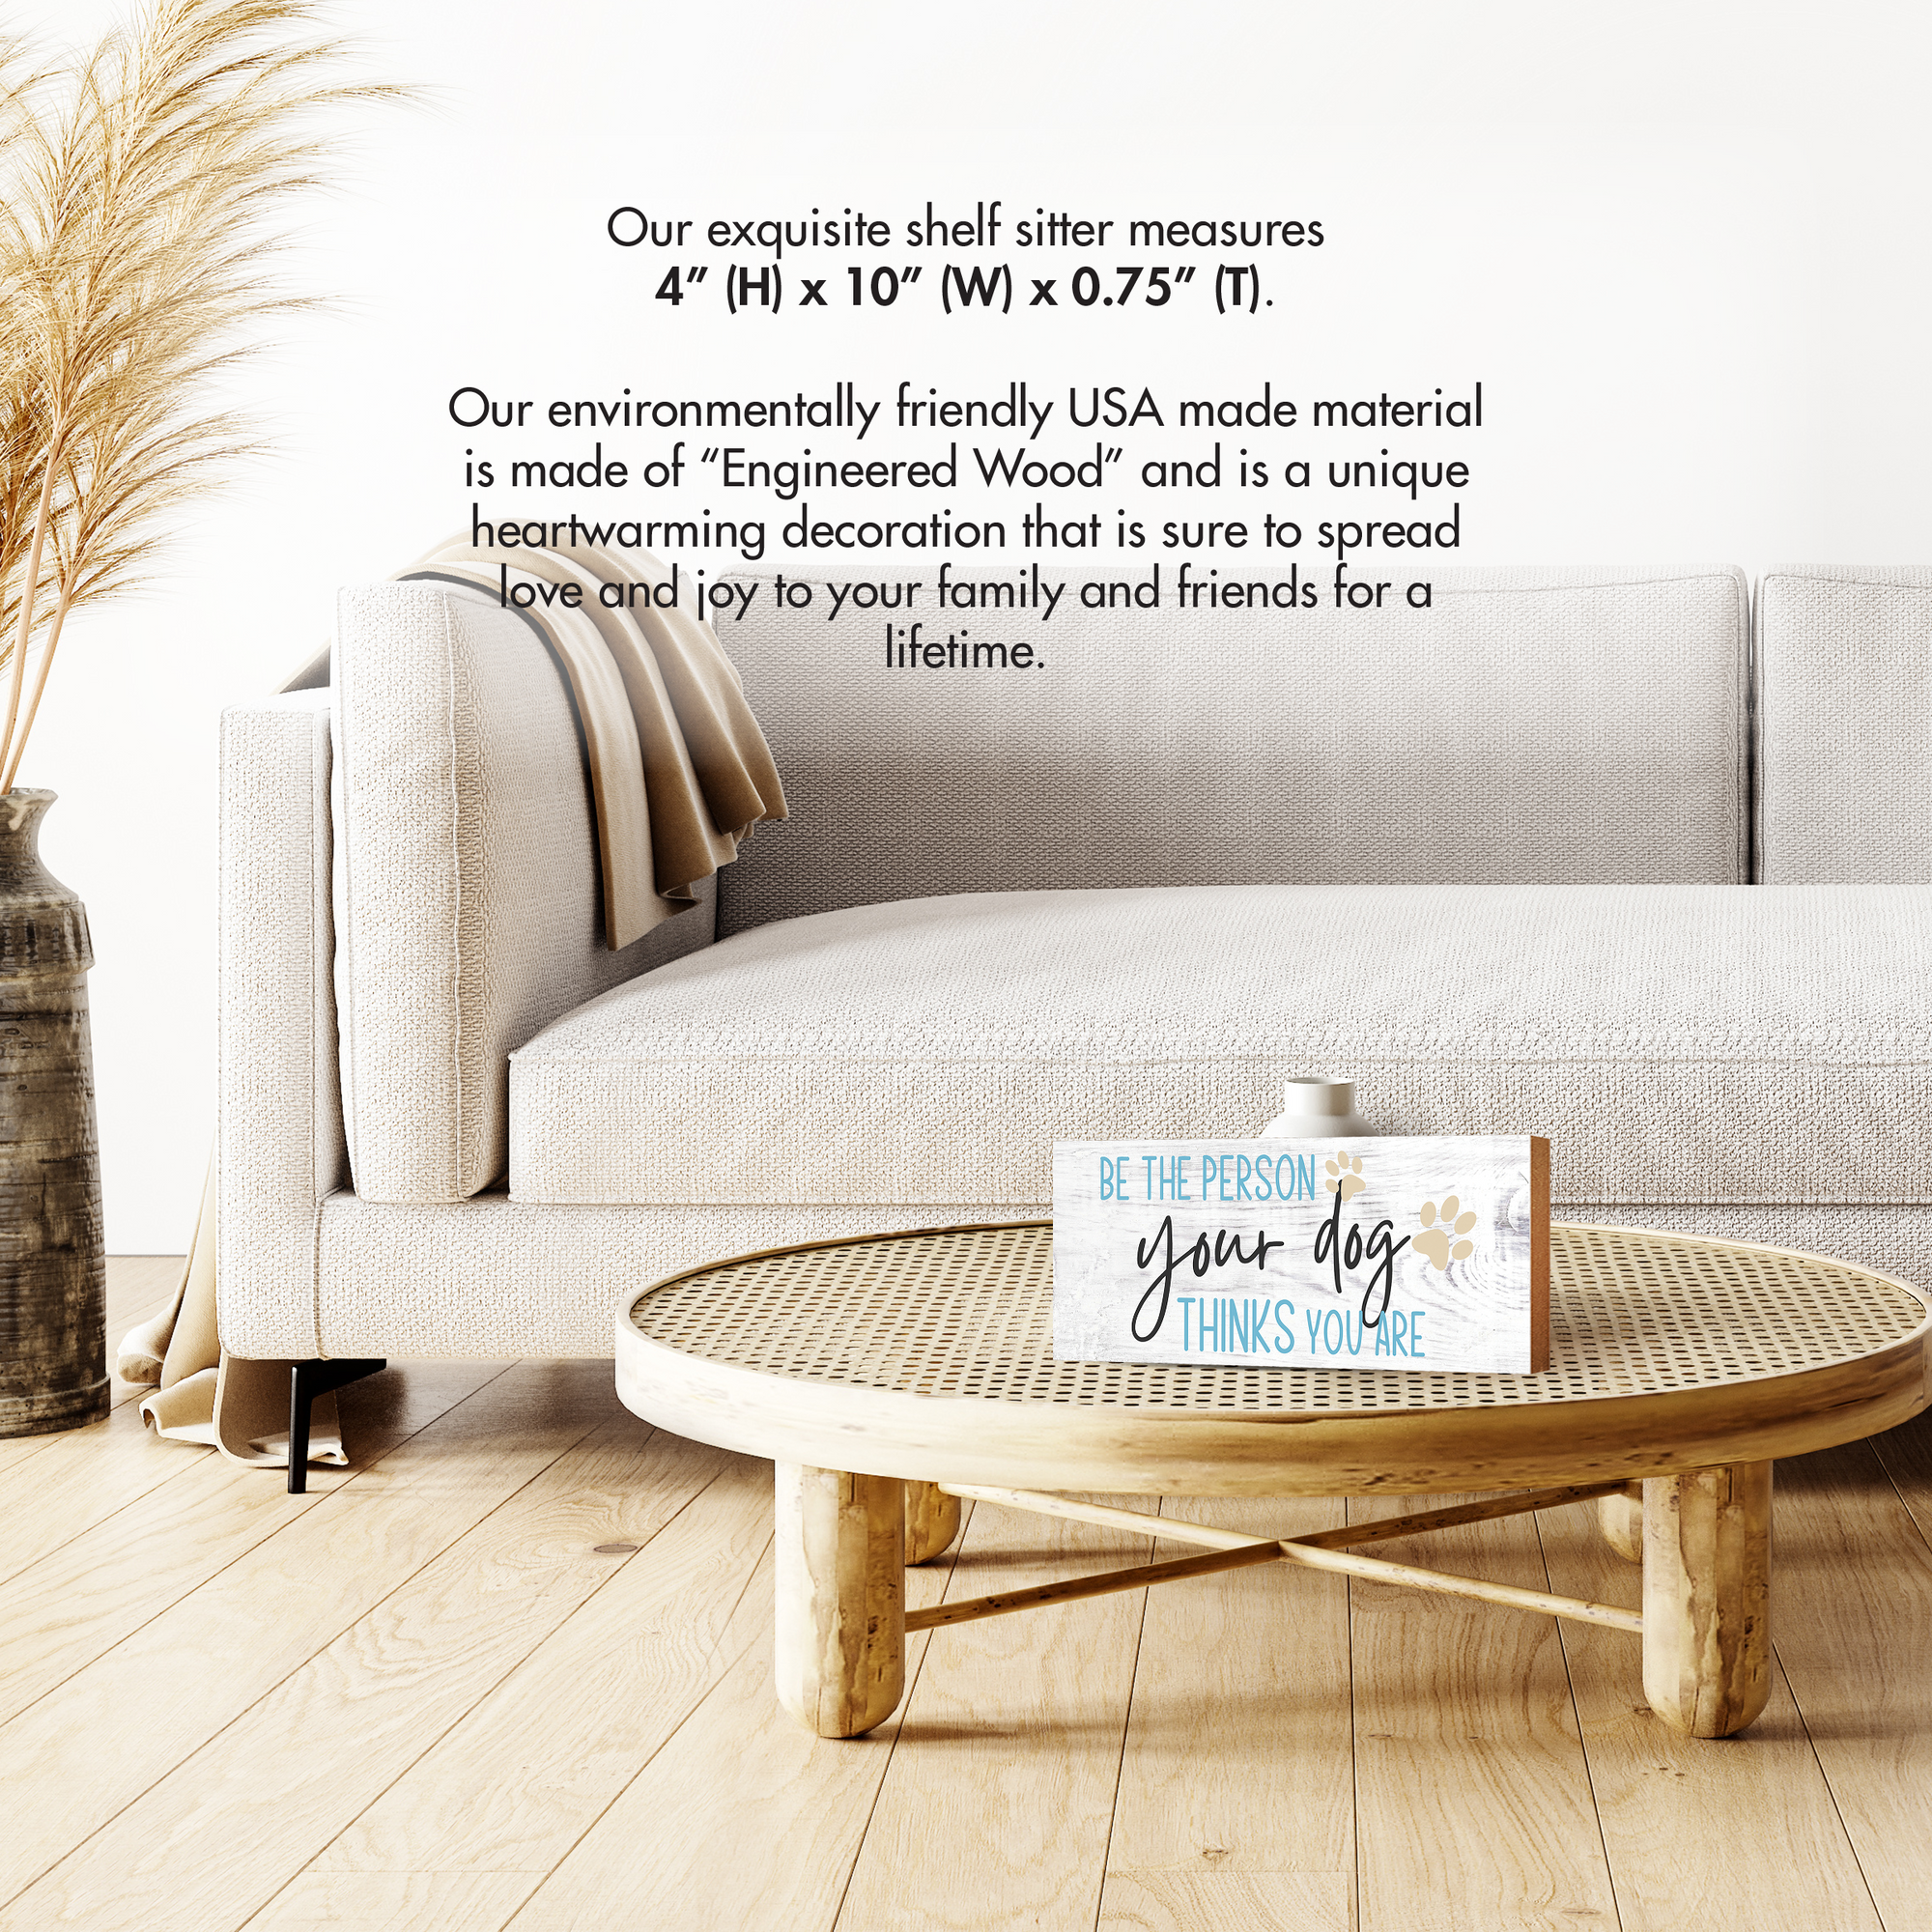 Wooden Shelf Decor and Tabletop Signs with Pet Verses - Be The Person Your Dog